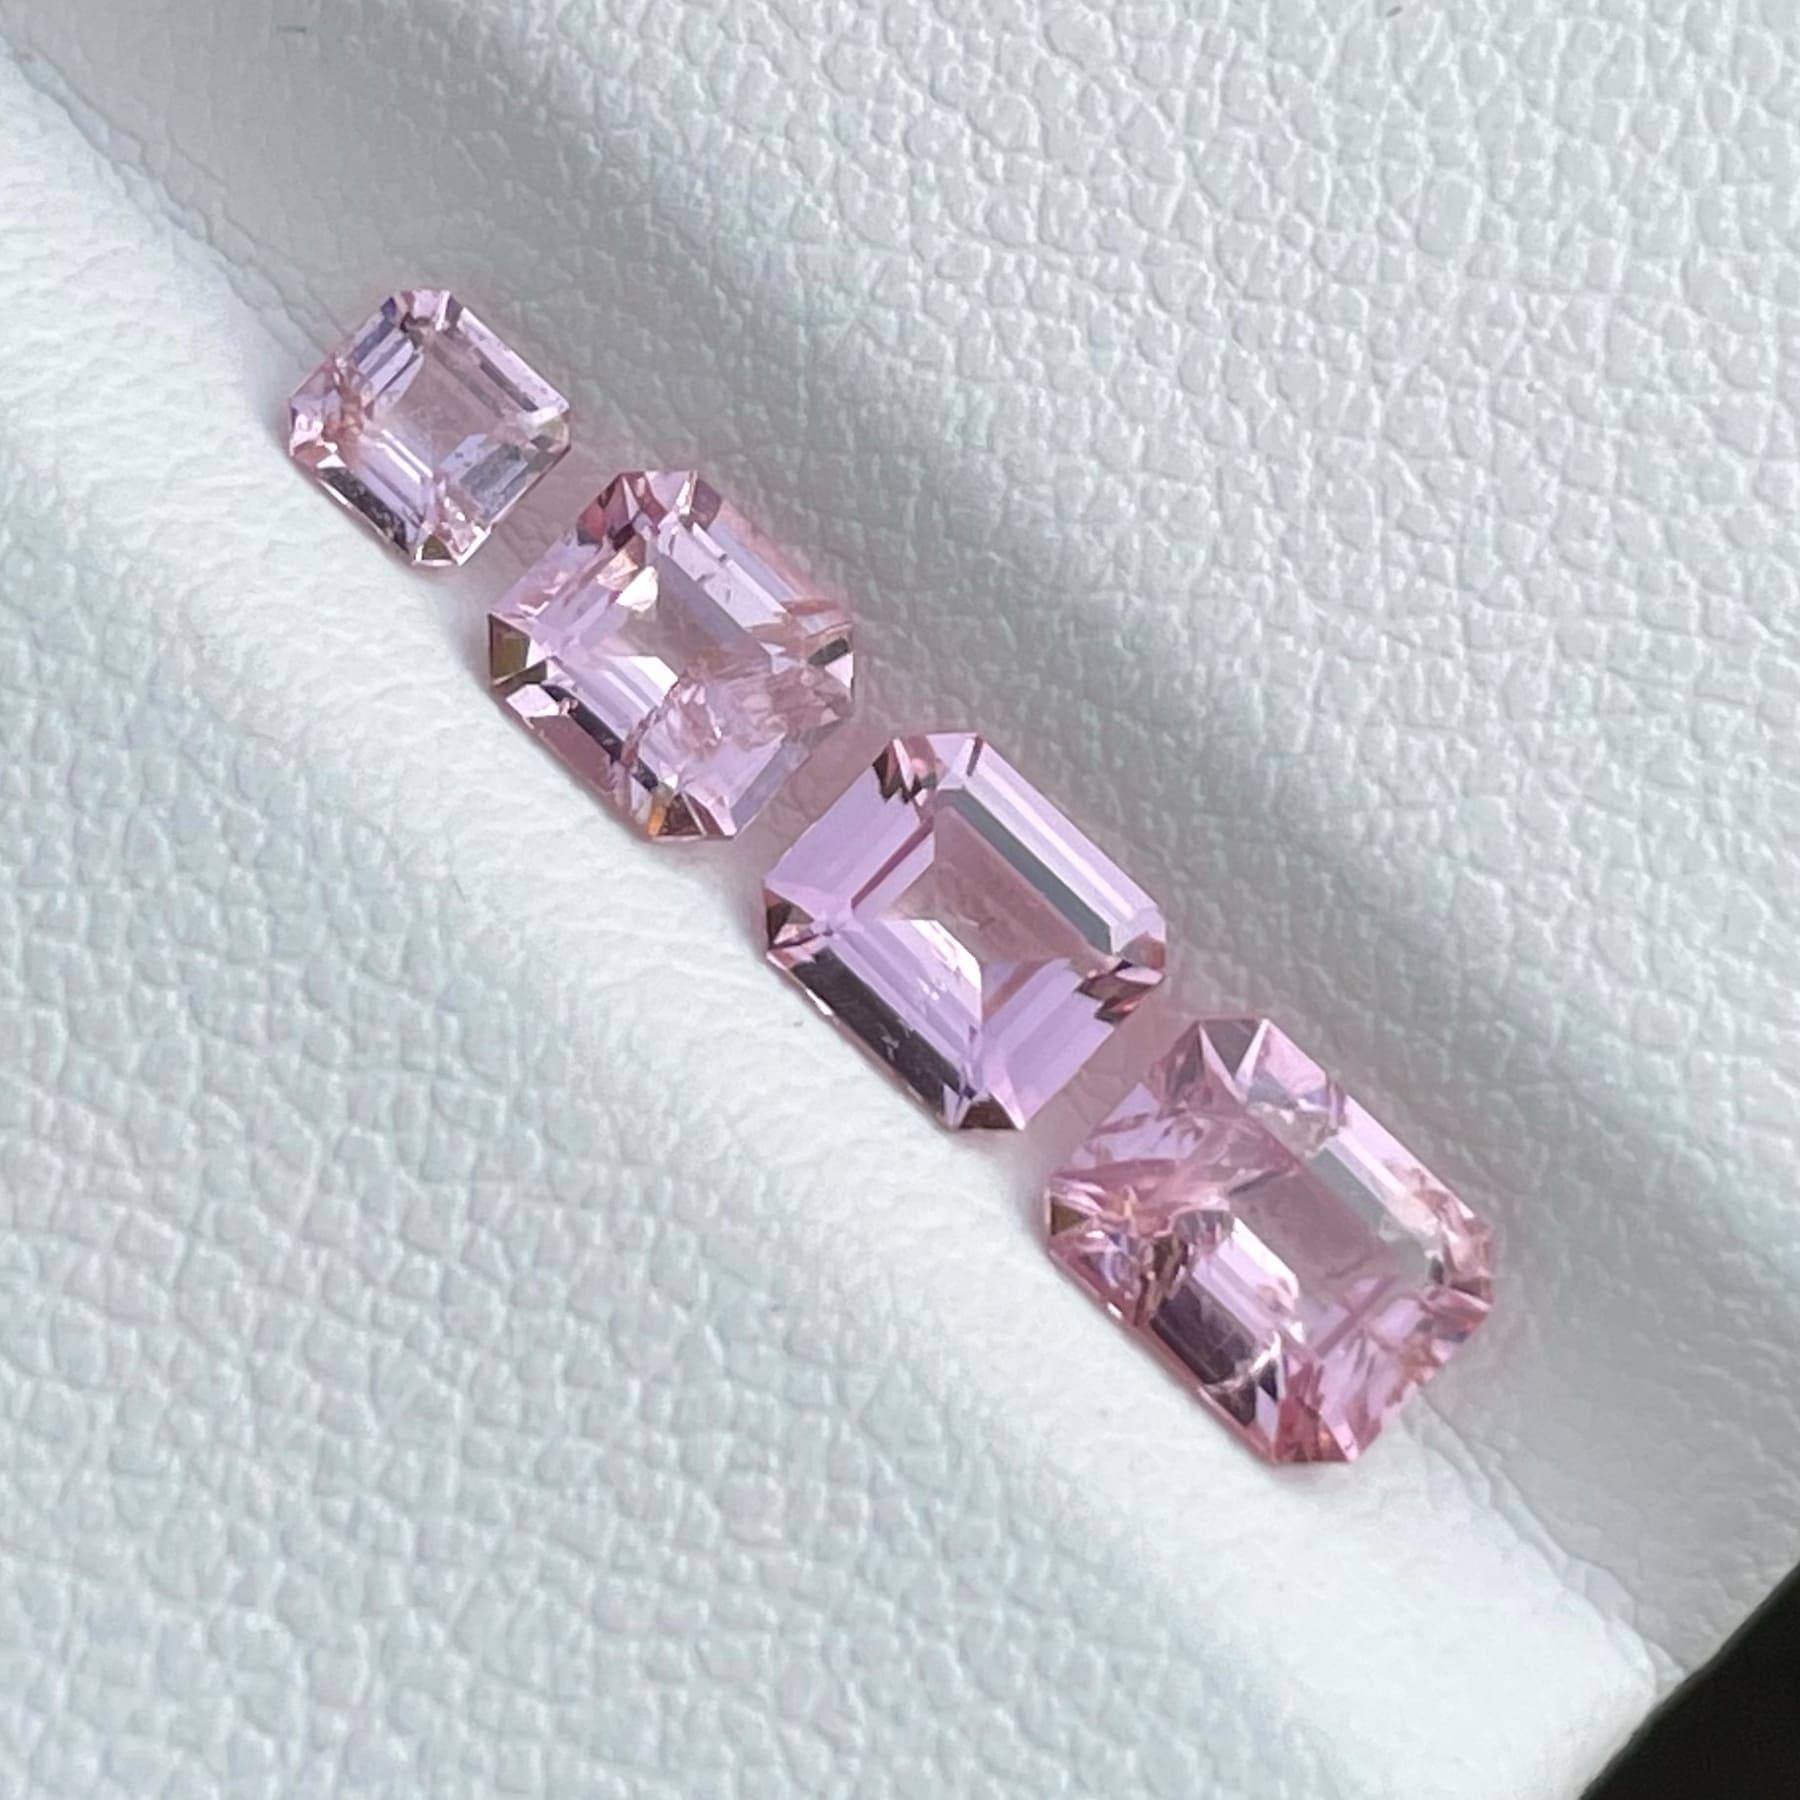 Modern 1.94 carats Pink Spinel Jewelry Batch Natural Loose Gemstones from Tajikistan For Sale